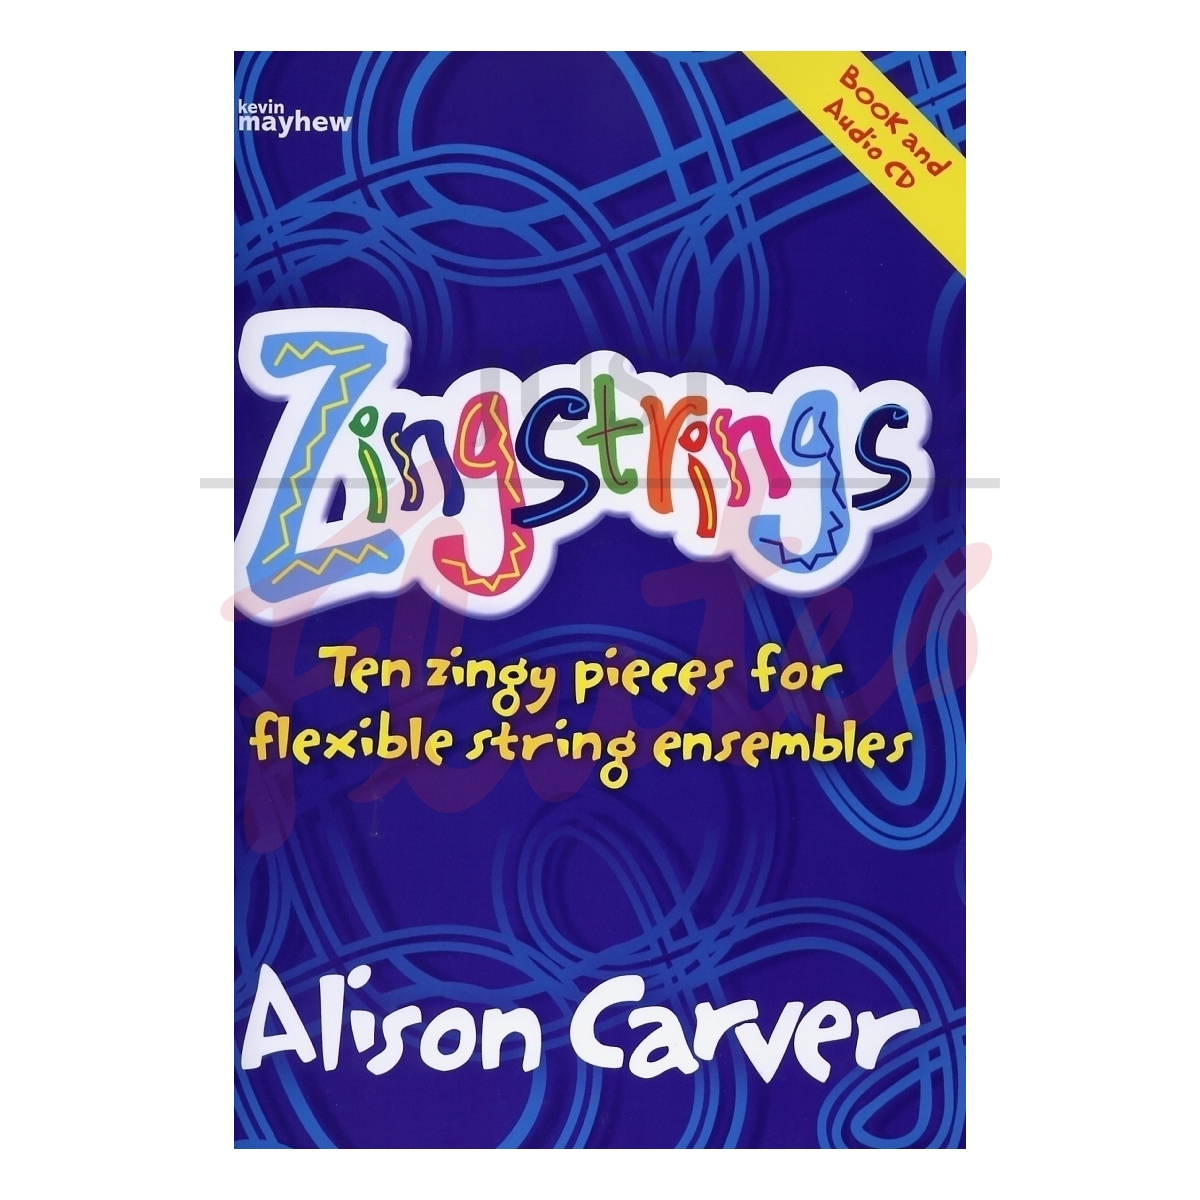 Zingstrings - 10 Zingy Pieces for Flexible String Ensemble